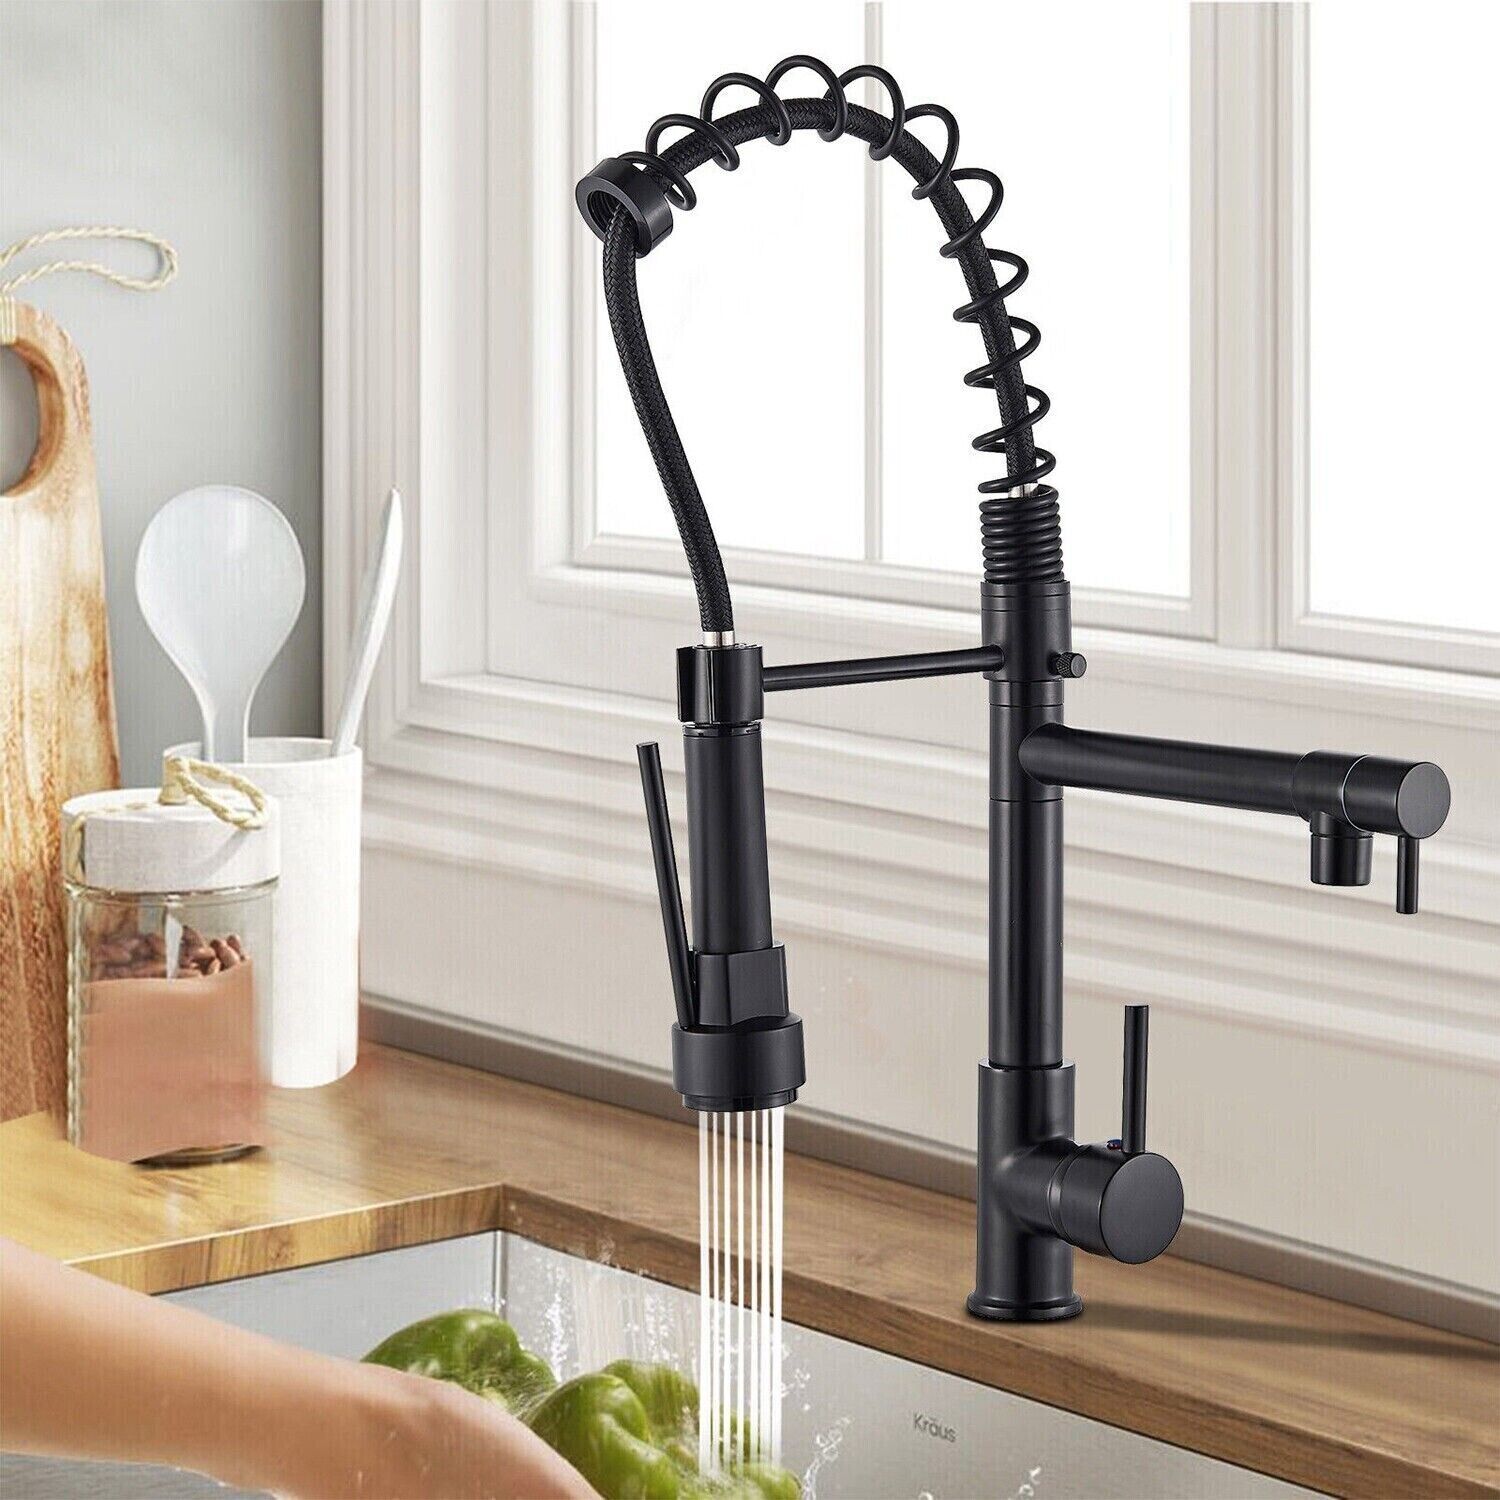 A vintage-inspired brass kitchen tap with cross handles, adding a classic touch to any kitchen decor.